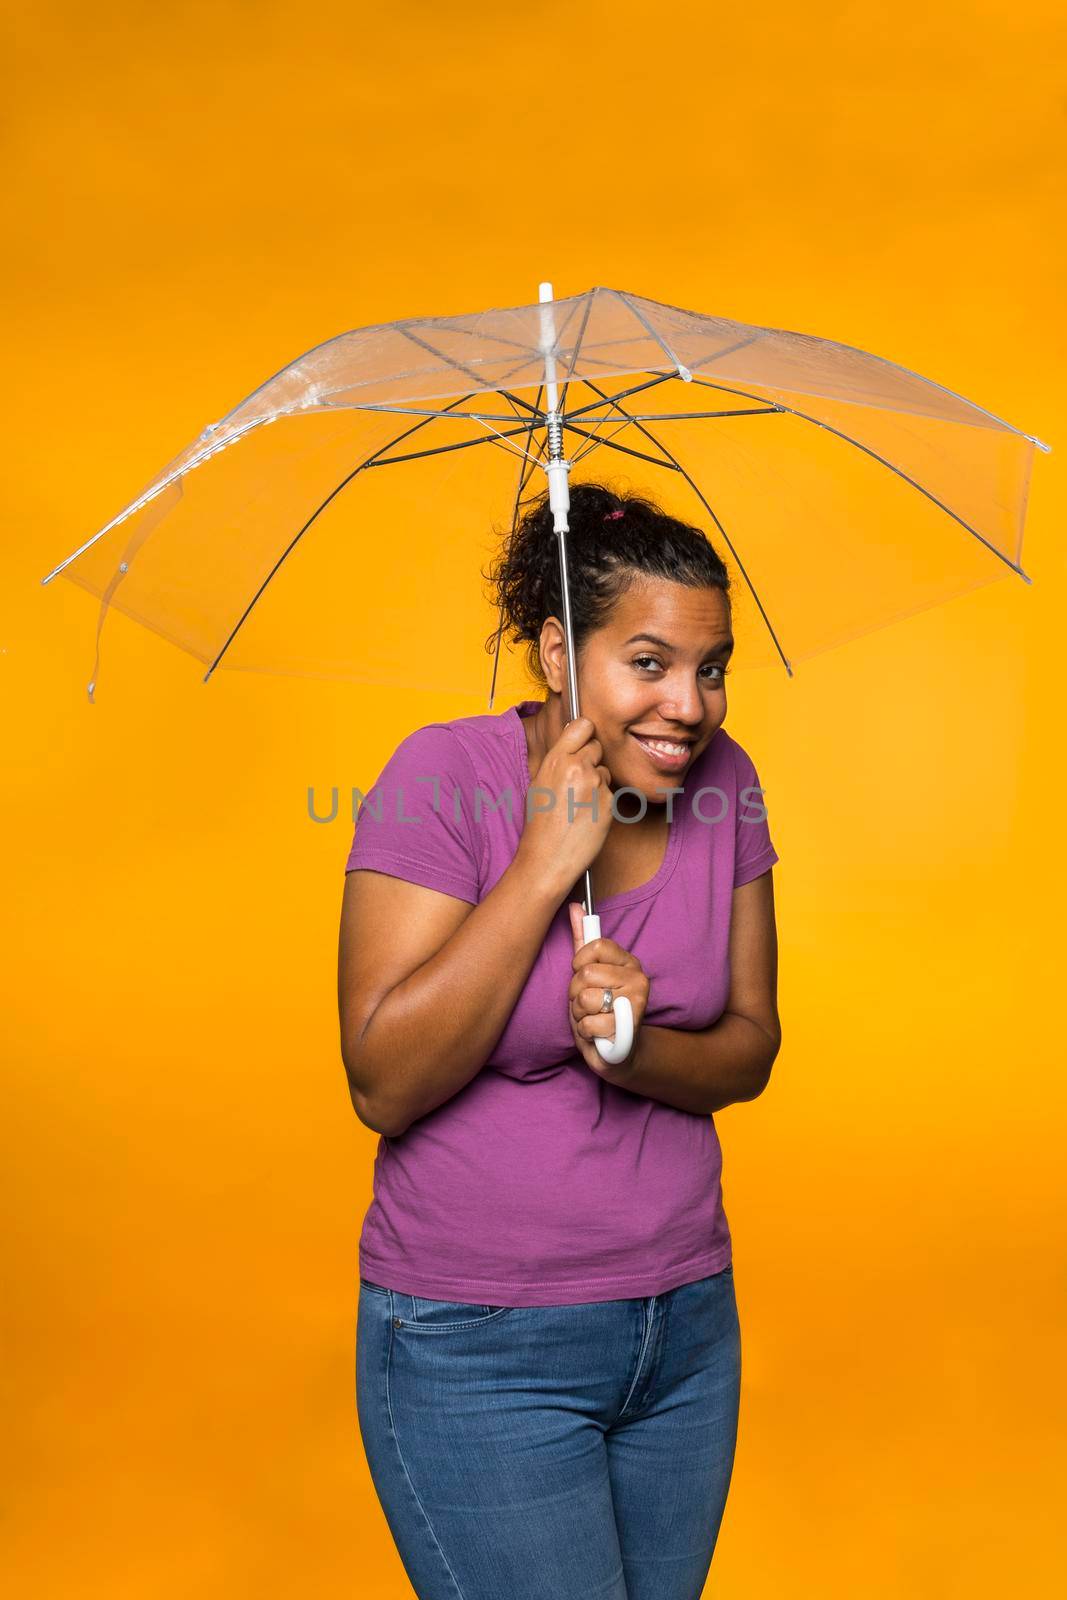 young attractive mixed race woman holding an umbrella wearing a purple shirt against a yellow background